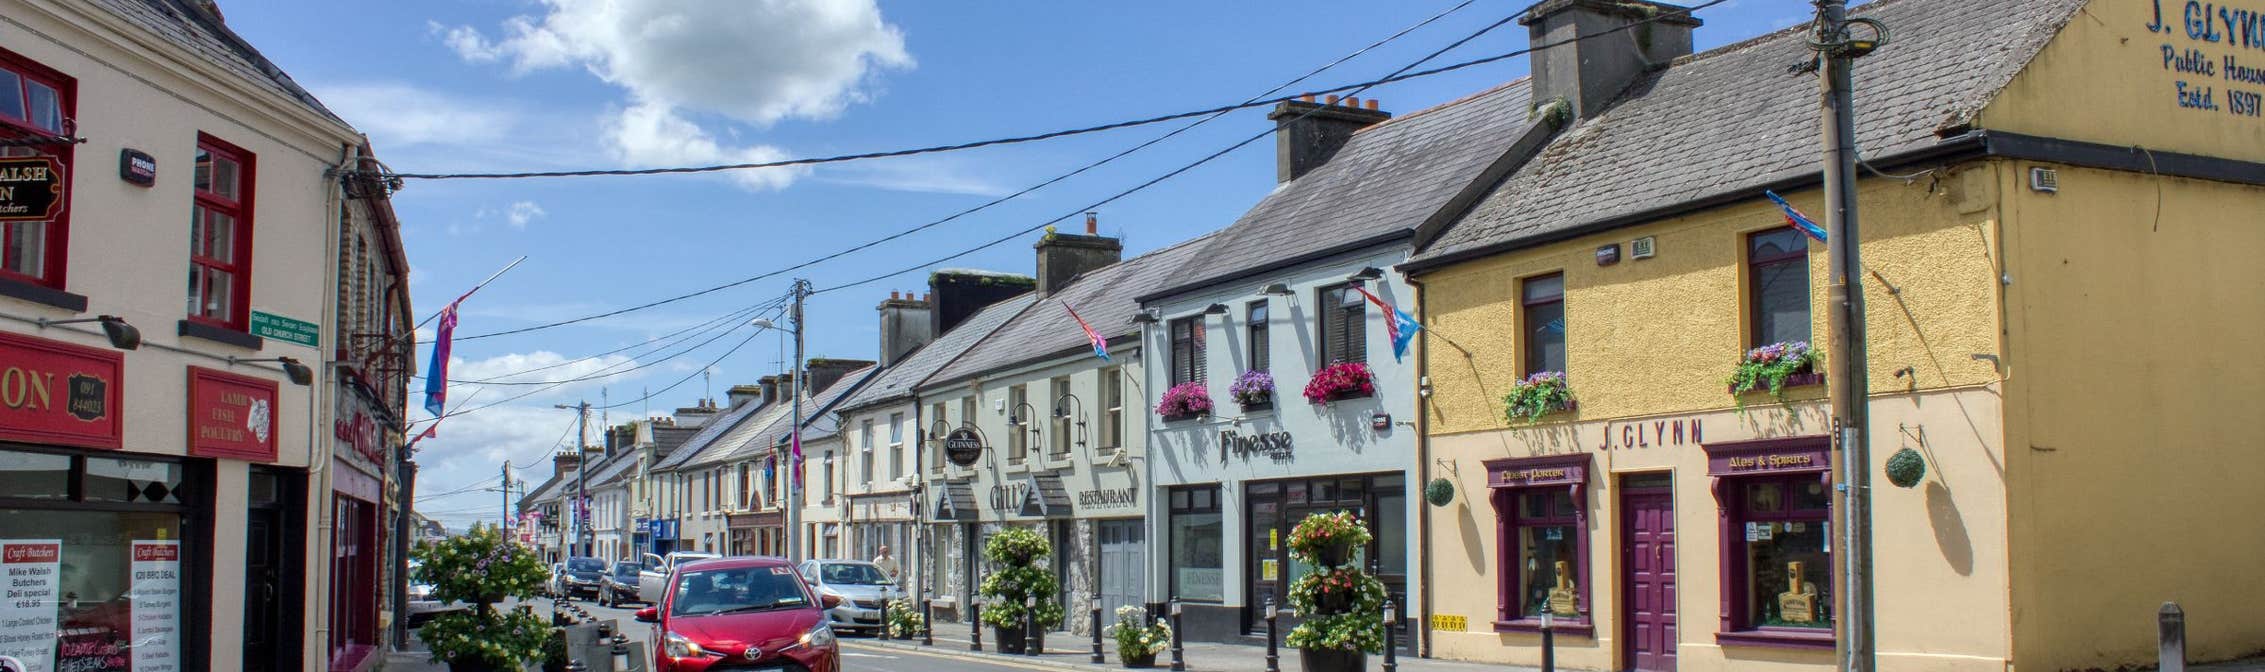 Image of Athenry town in County Galway